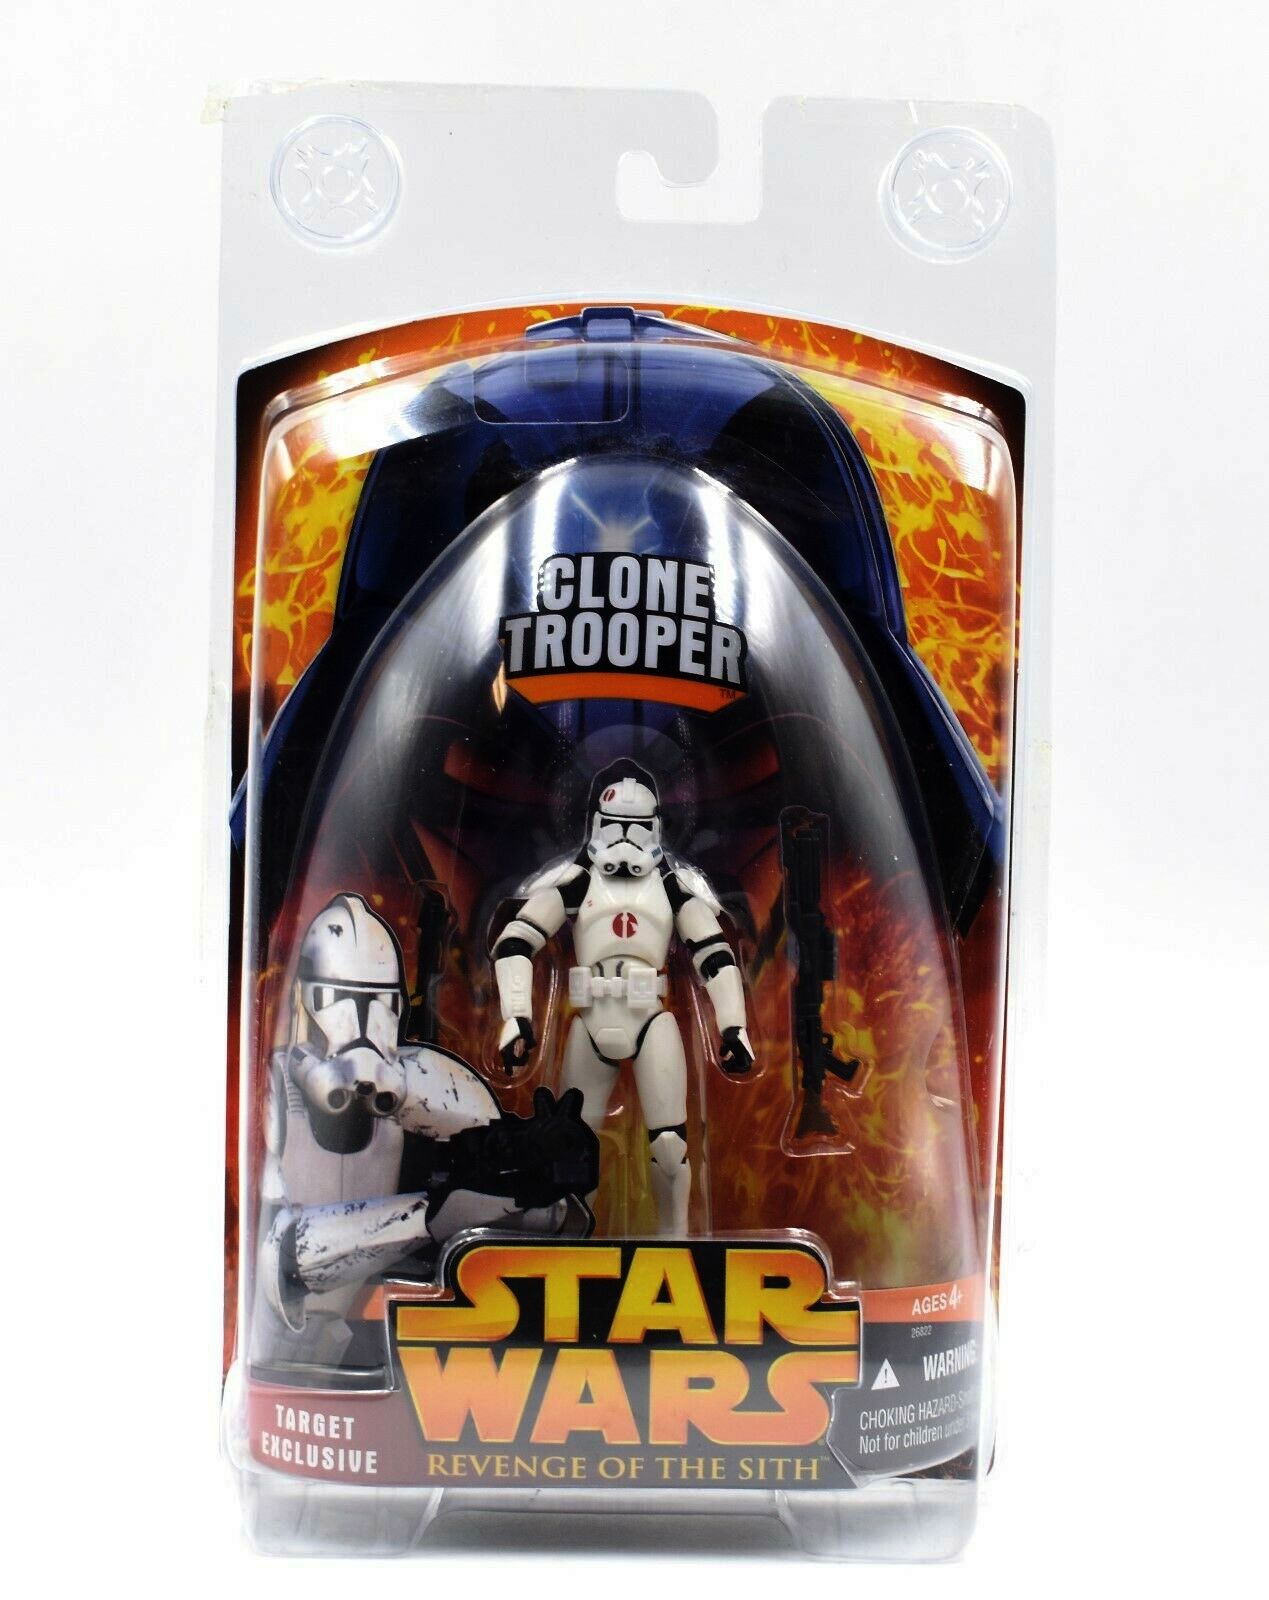 Hasbro Star Wars Revenge of the Sith Target Exclusive Clone Trooper Action Figure for sale online